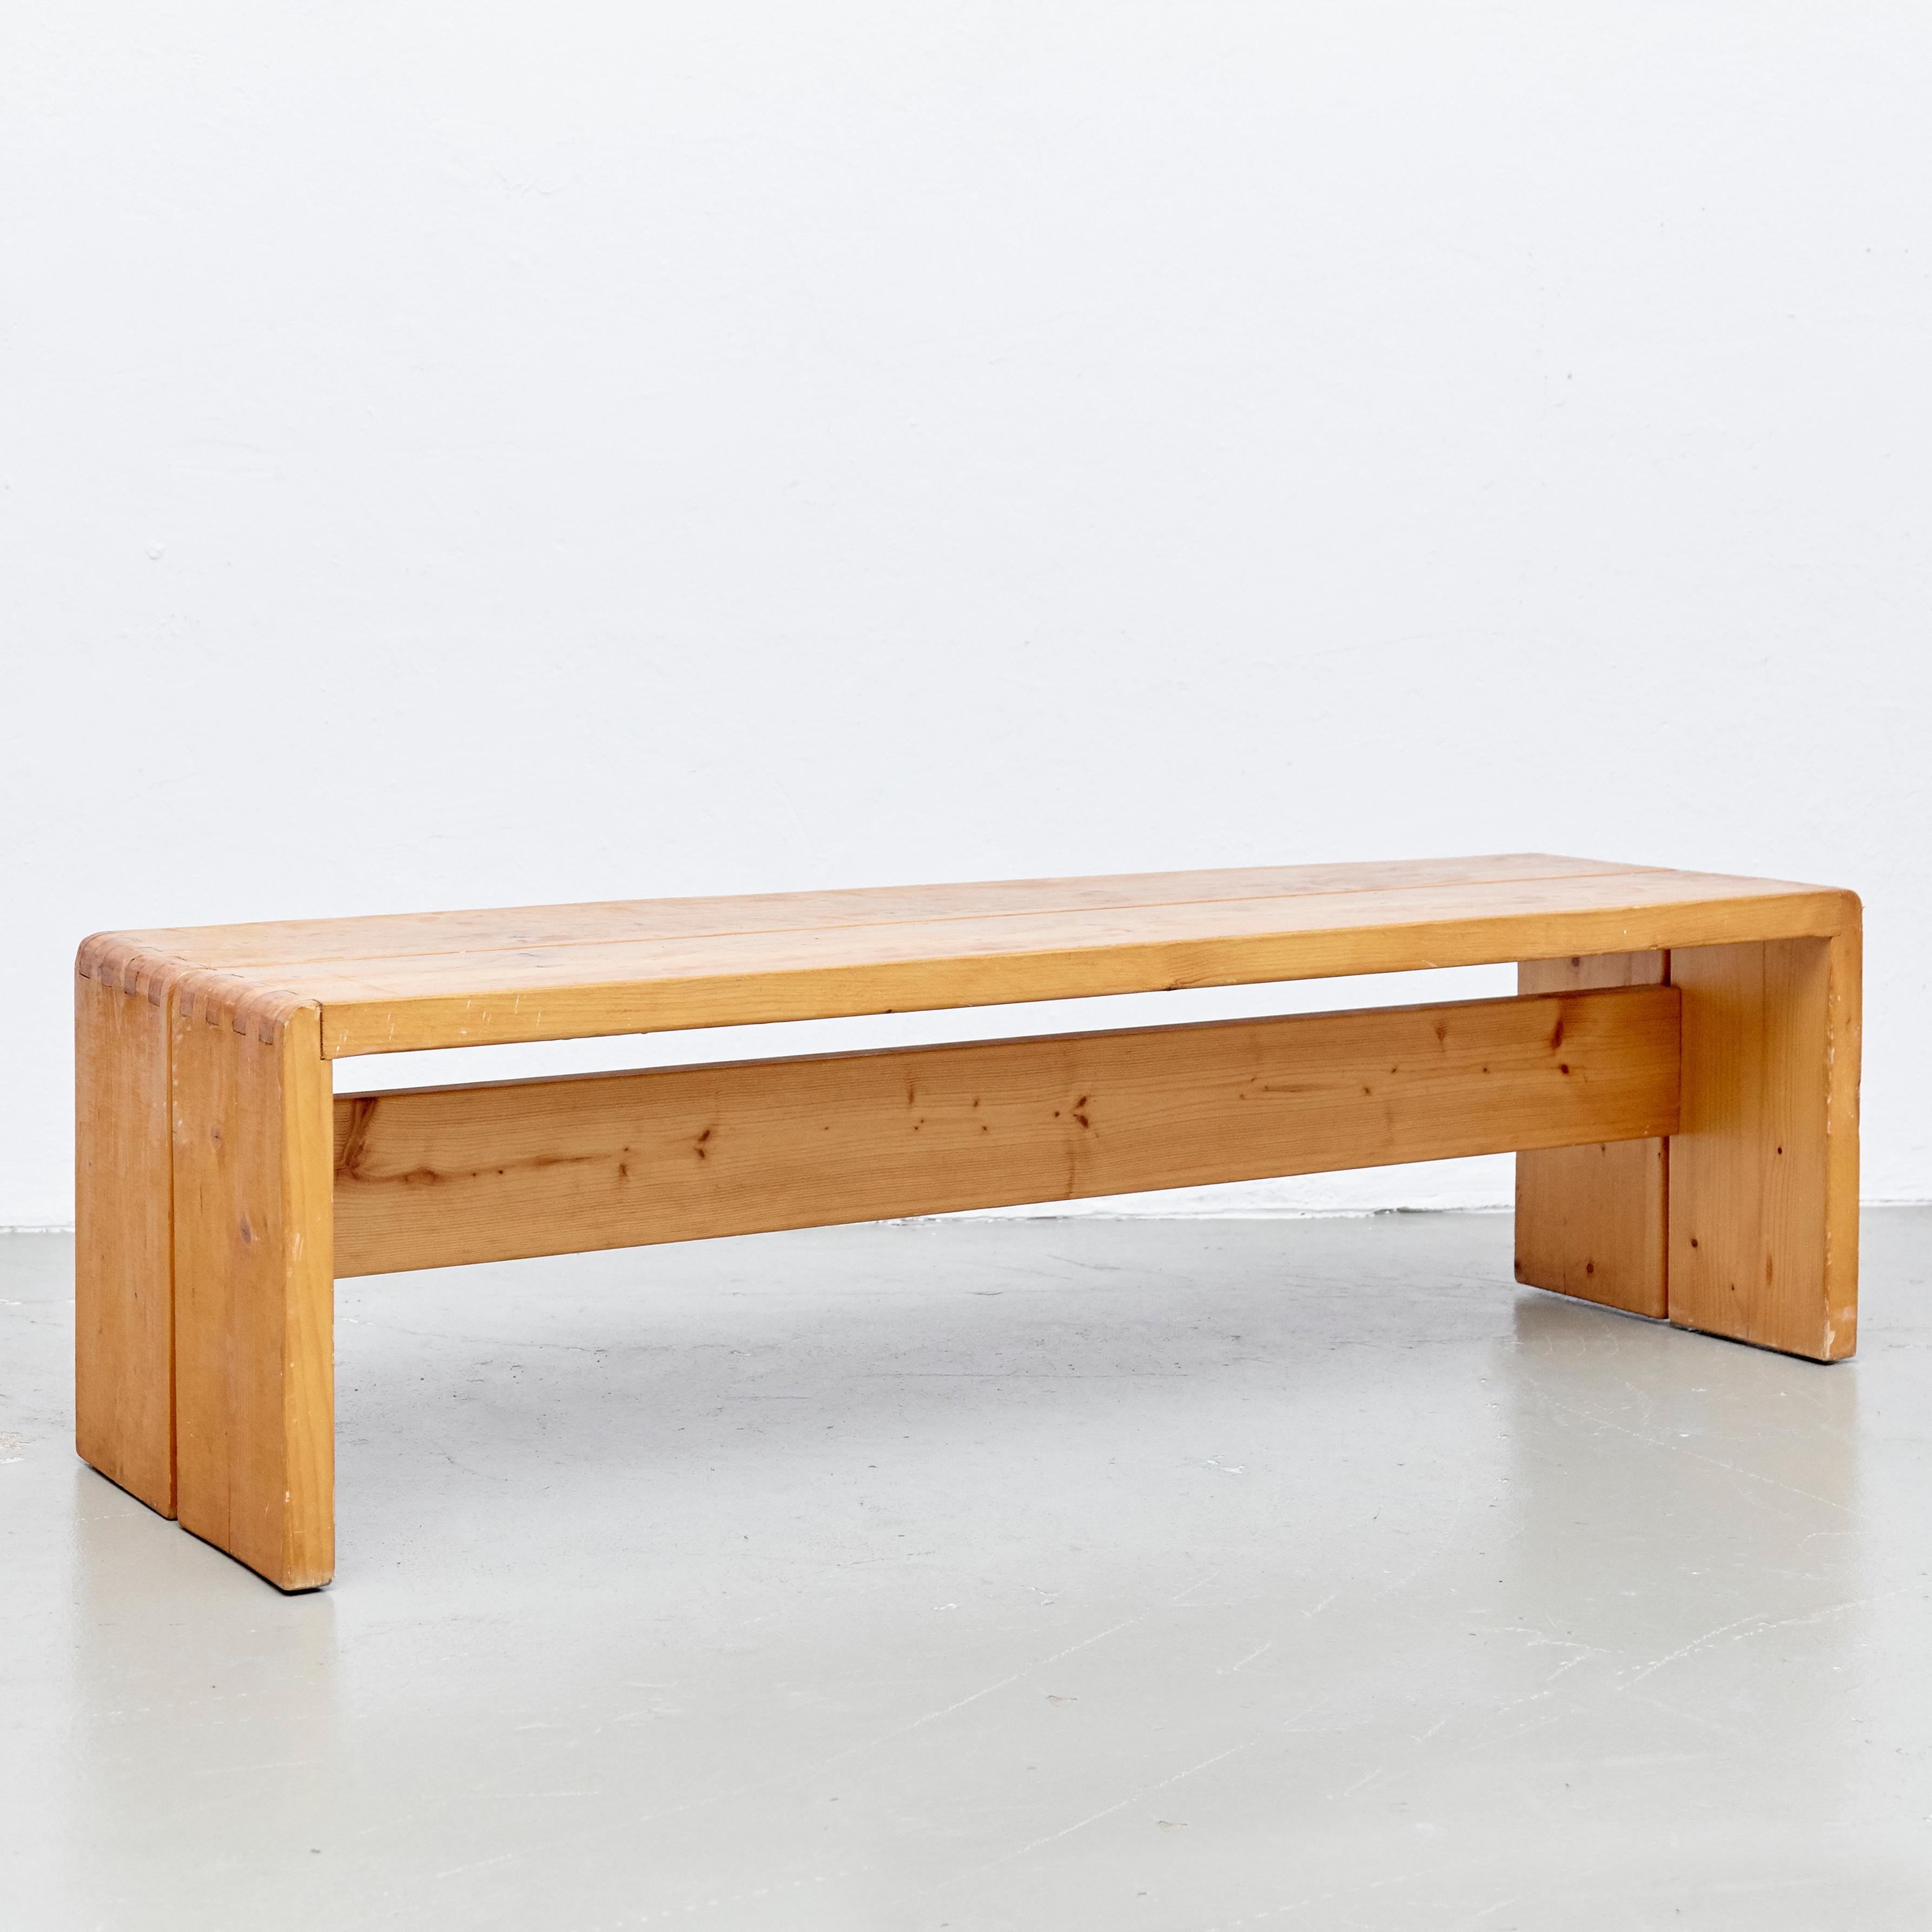 Bench designed by Charlotte Perriand for Les Arcs ski resort circa 1960, manufactured in France.
Pinewood.

In original condition, with wear consistent with age and use, preserving a beautiful patina.

Charlotte Perriand (1903-1999) She was